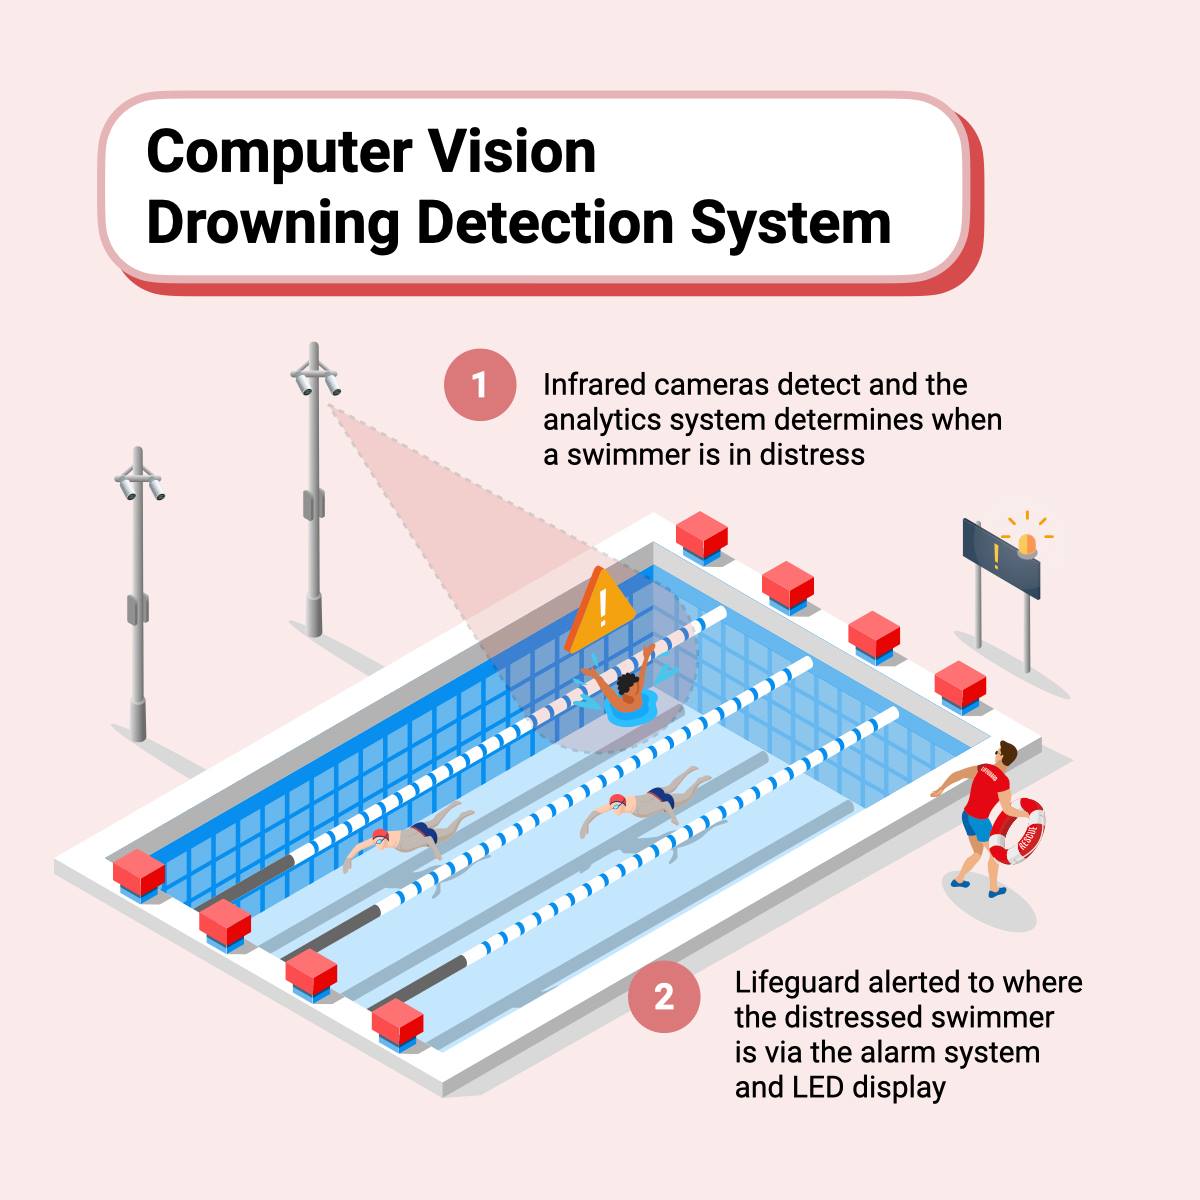 Drowning Detection System